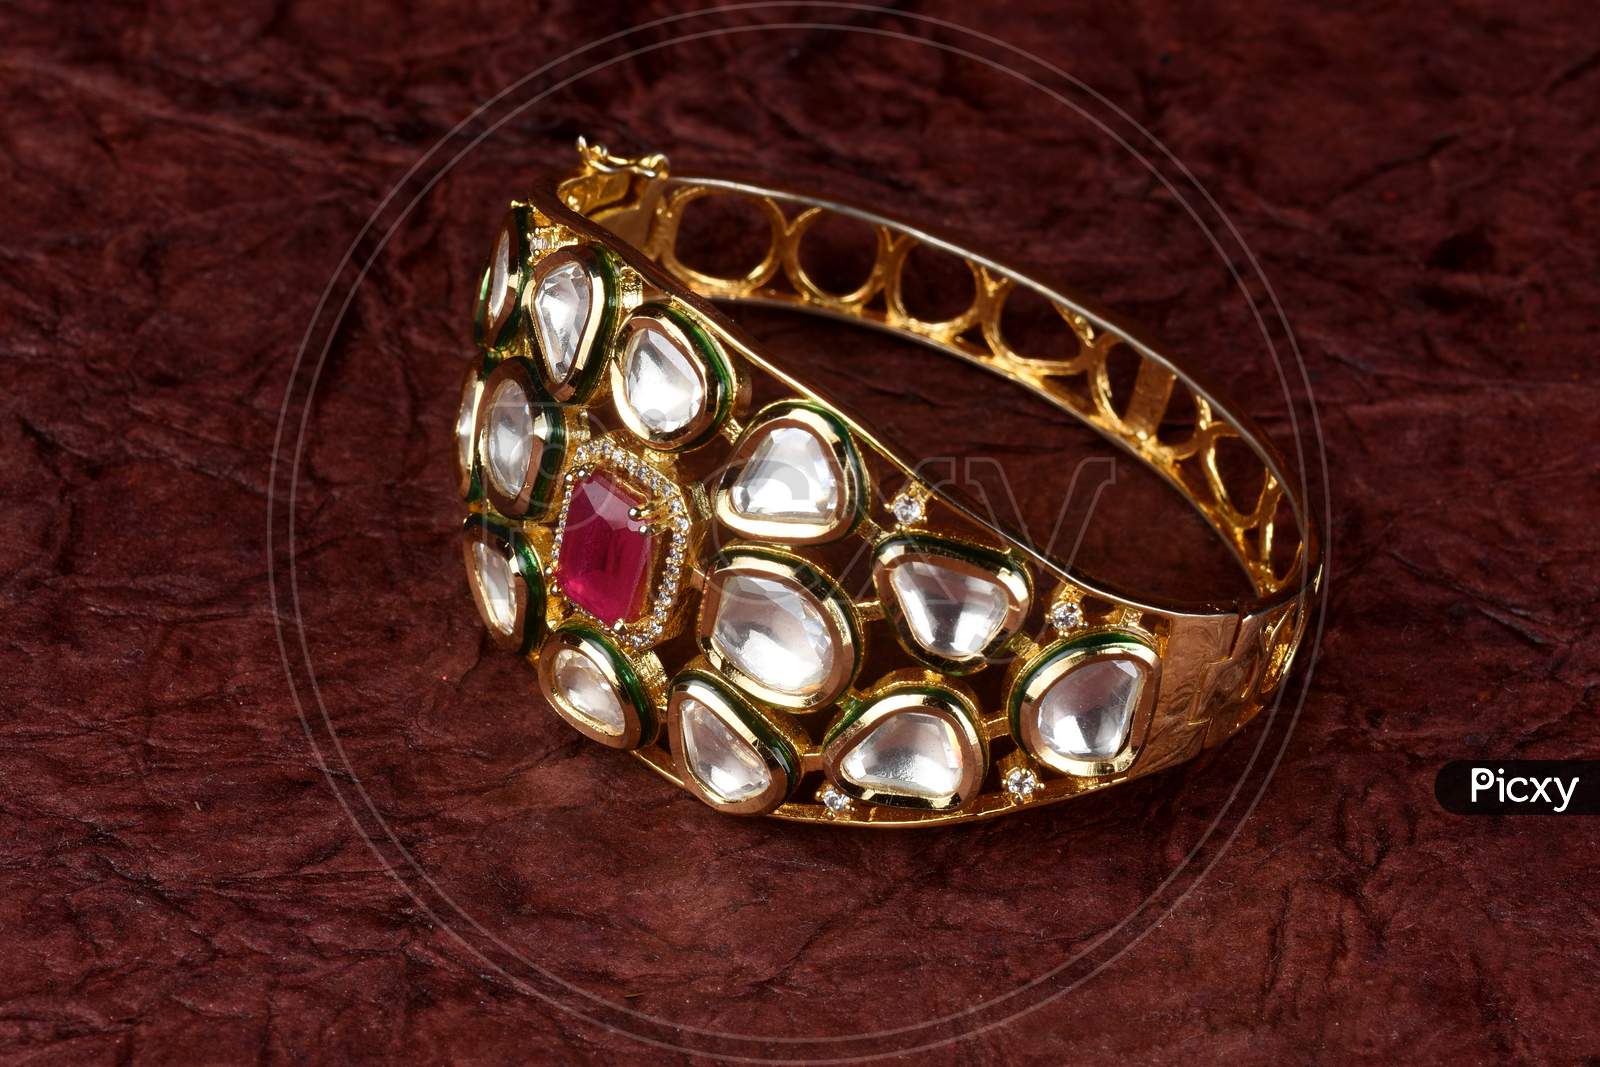 Gold Bracelet On Textured Background,Kundan Bracelet,Style, Fashion And Design Of Jewelry. Indian Traditional Jewellery,Indian Wedding Jewellery